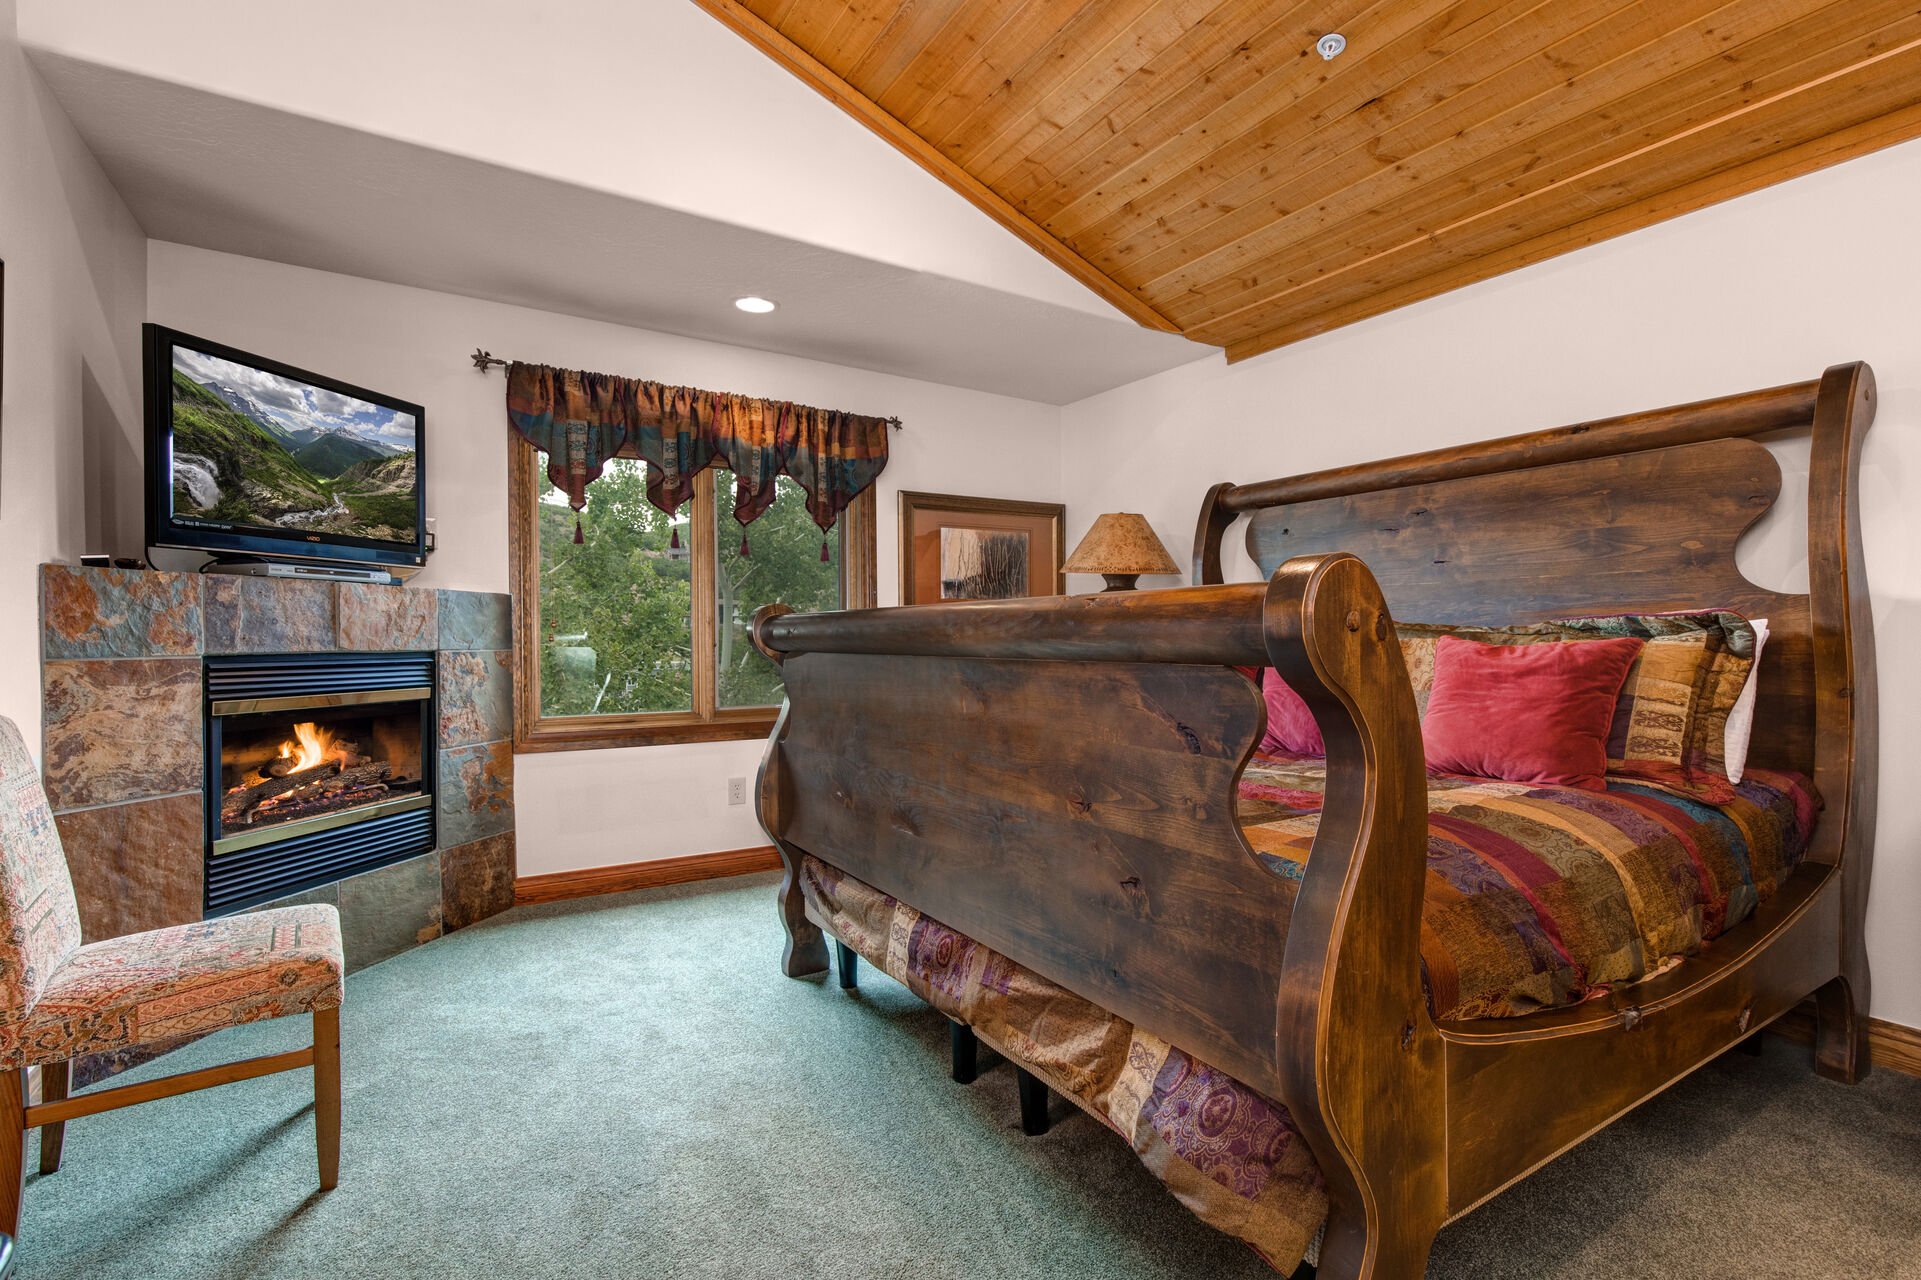 Master Bedroom with king bed, TV, gas fireplace, vaulted ceiling, and en suite bathroom